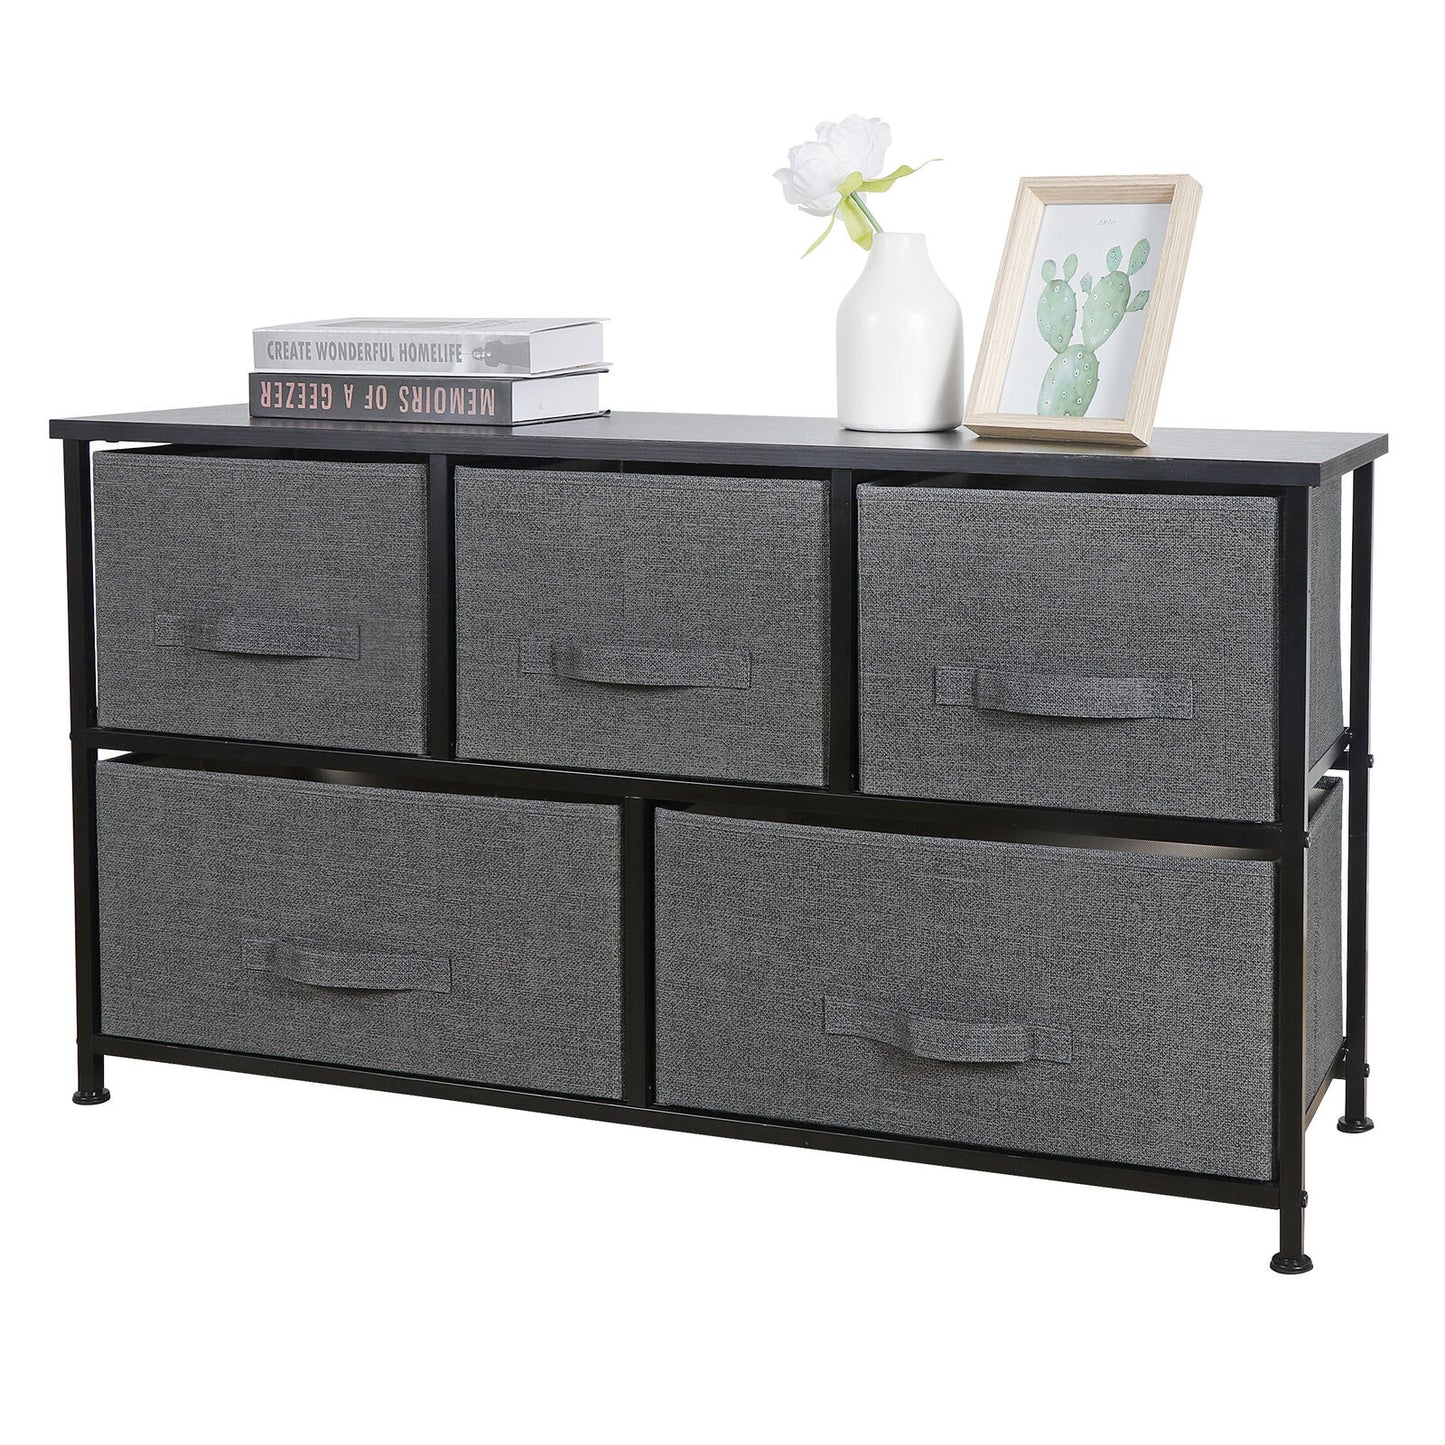 Extra Wide Dresser Storage Tower 5 Drawers Bedroom Hallway Entryway Closets